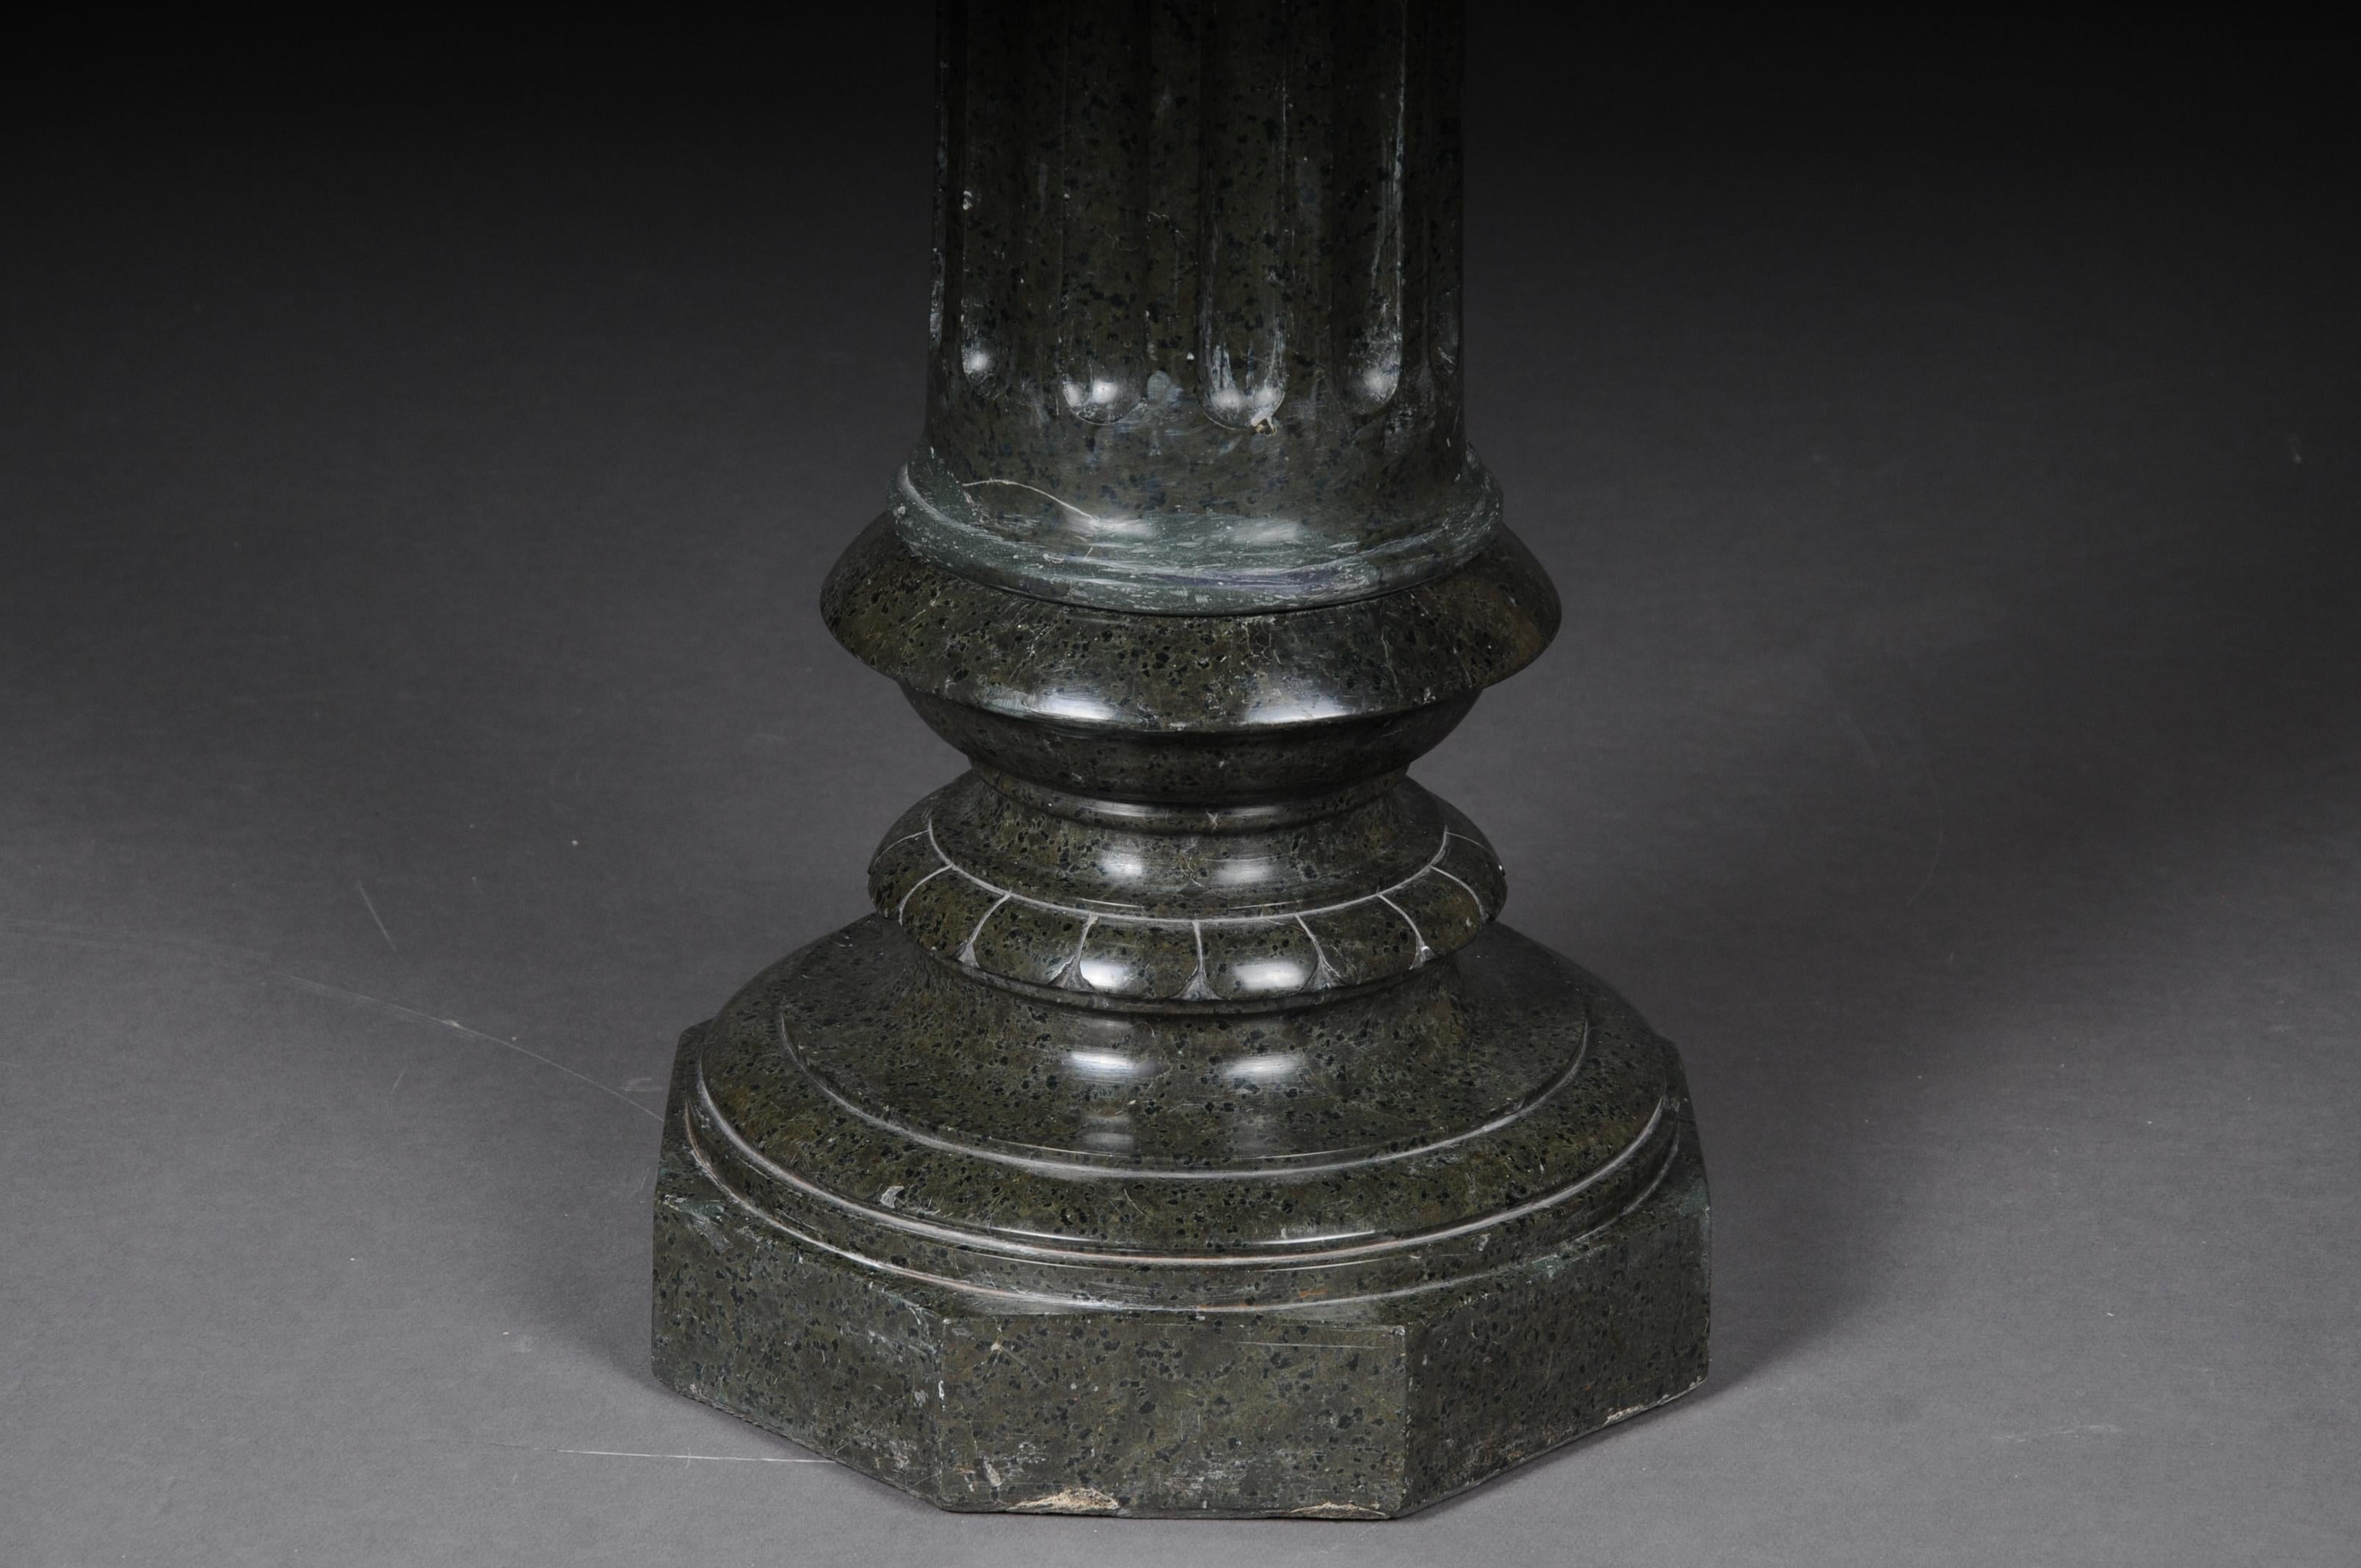 19th century Classicist granite column 
Black-green serpentine. Octagonal bottom and top plate, fluted shank. Traces of age and use available, circa 19th century.

(K - 35).